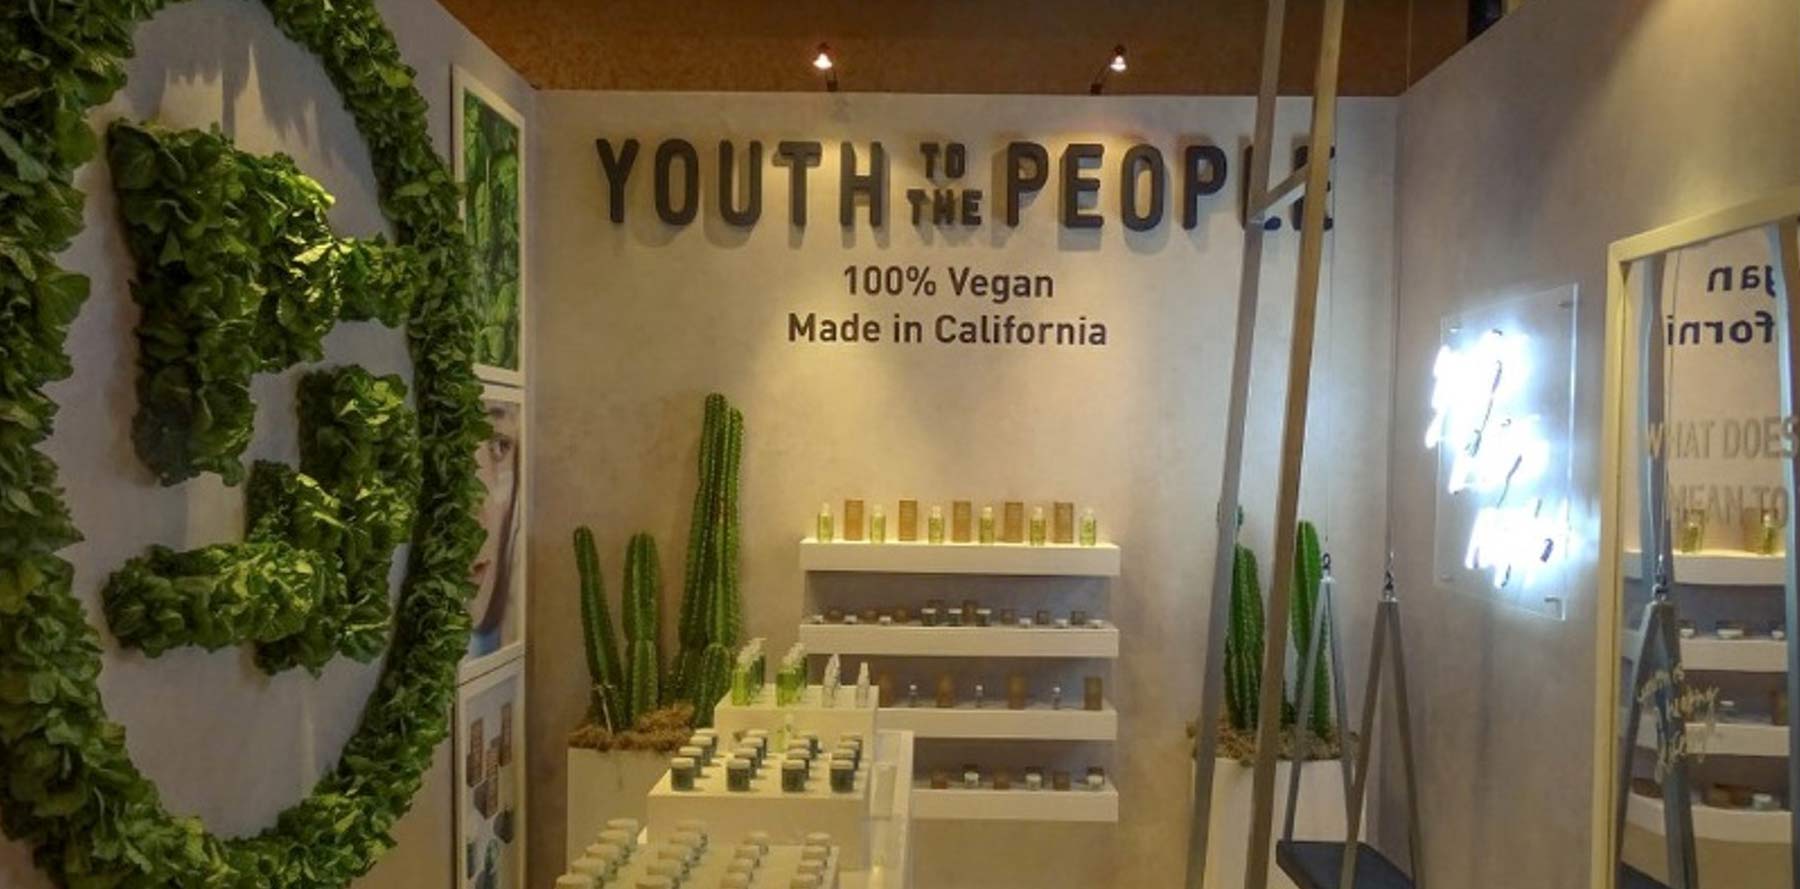 Youth to the People sign in a shop